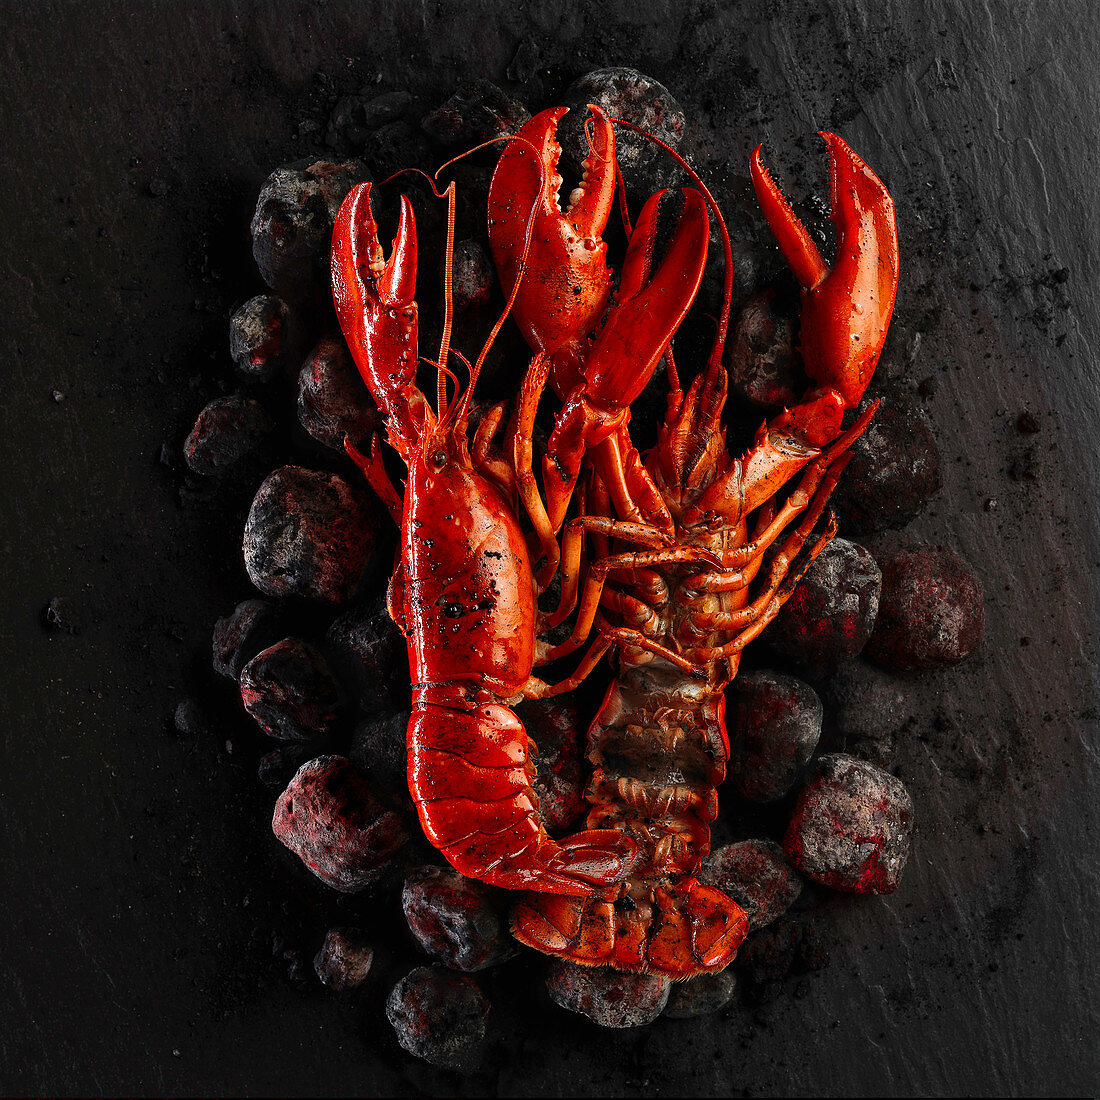 Lobsters on hot coals